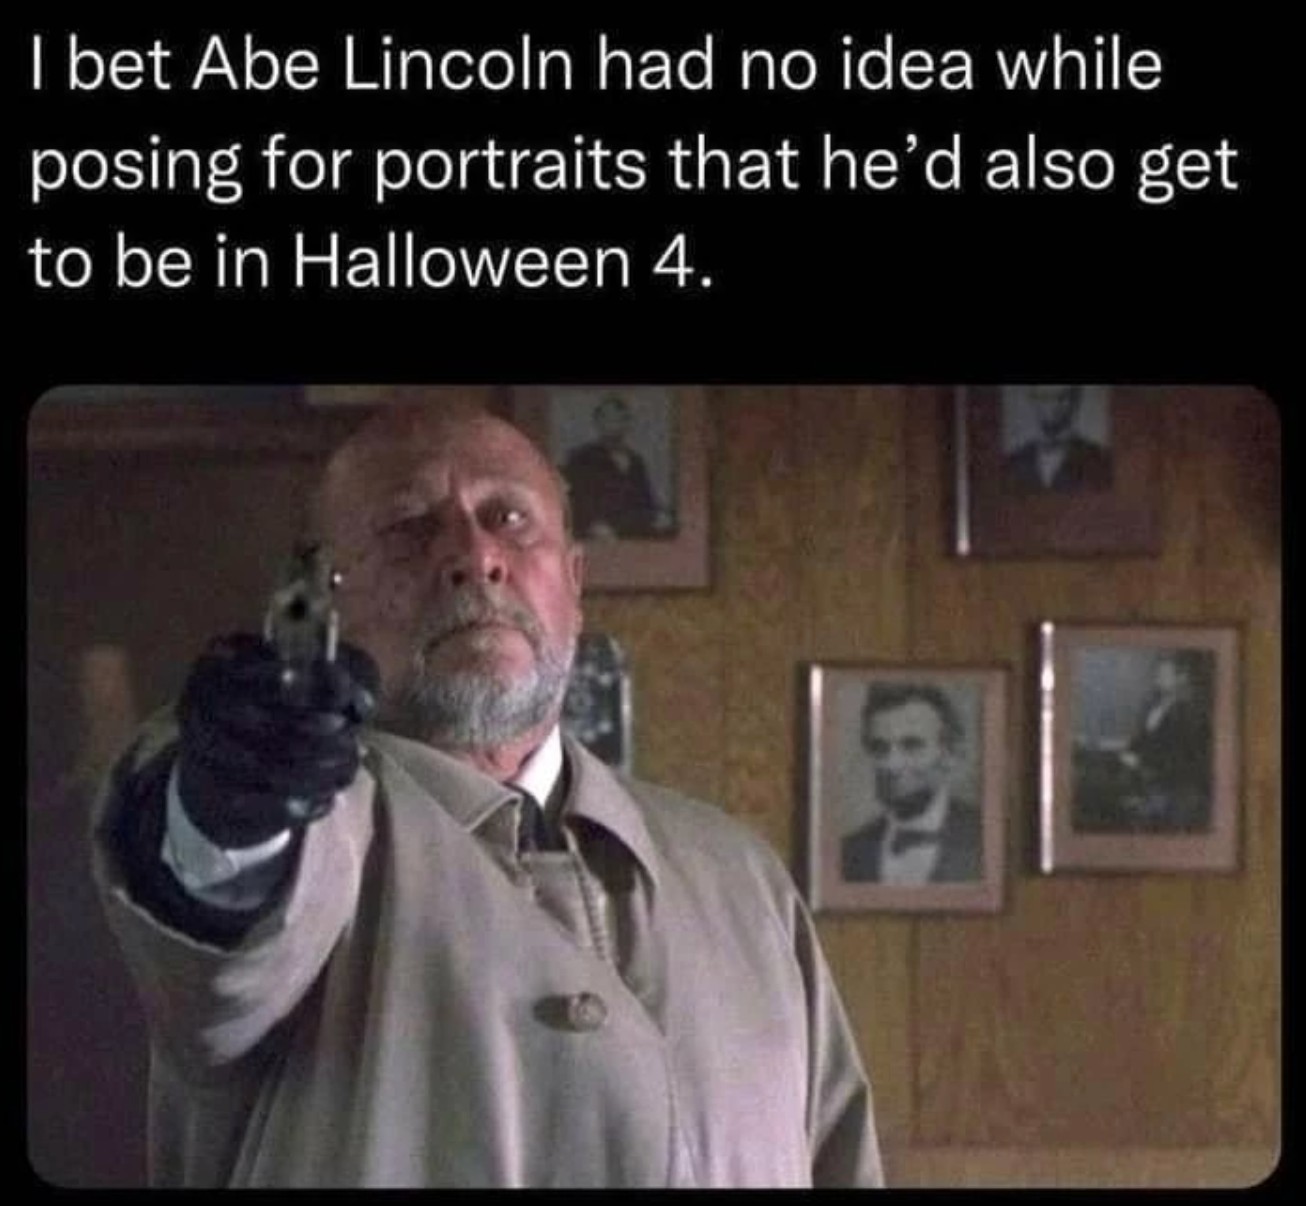 Movie memes - abe lincoln halloween 4 meme - I bet Abe Lincoln had no idea while posing for portraits that he'd also get to be in Halloween 4.